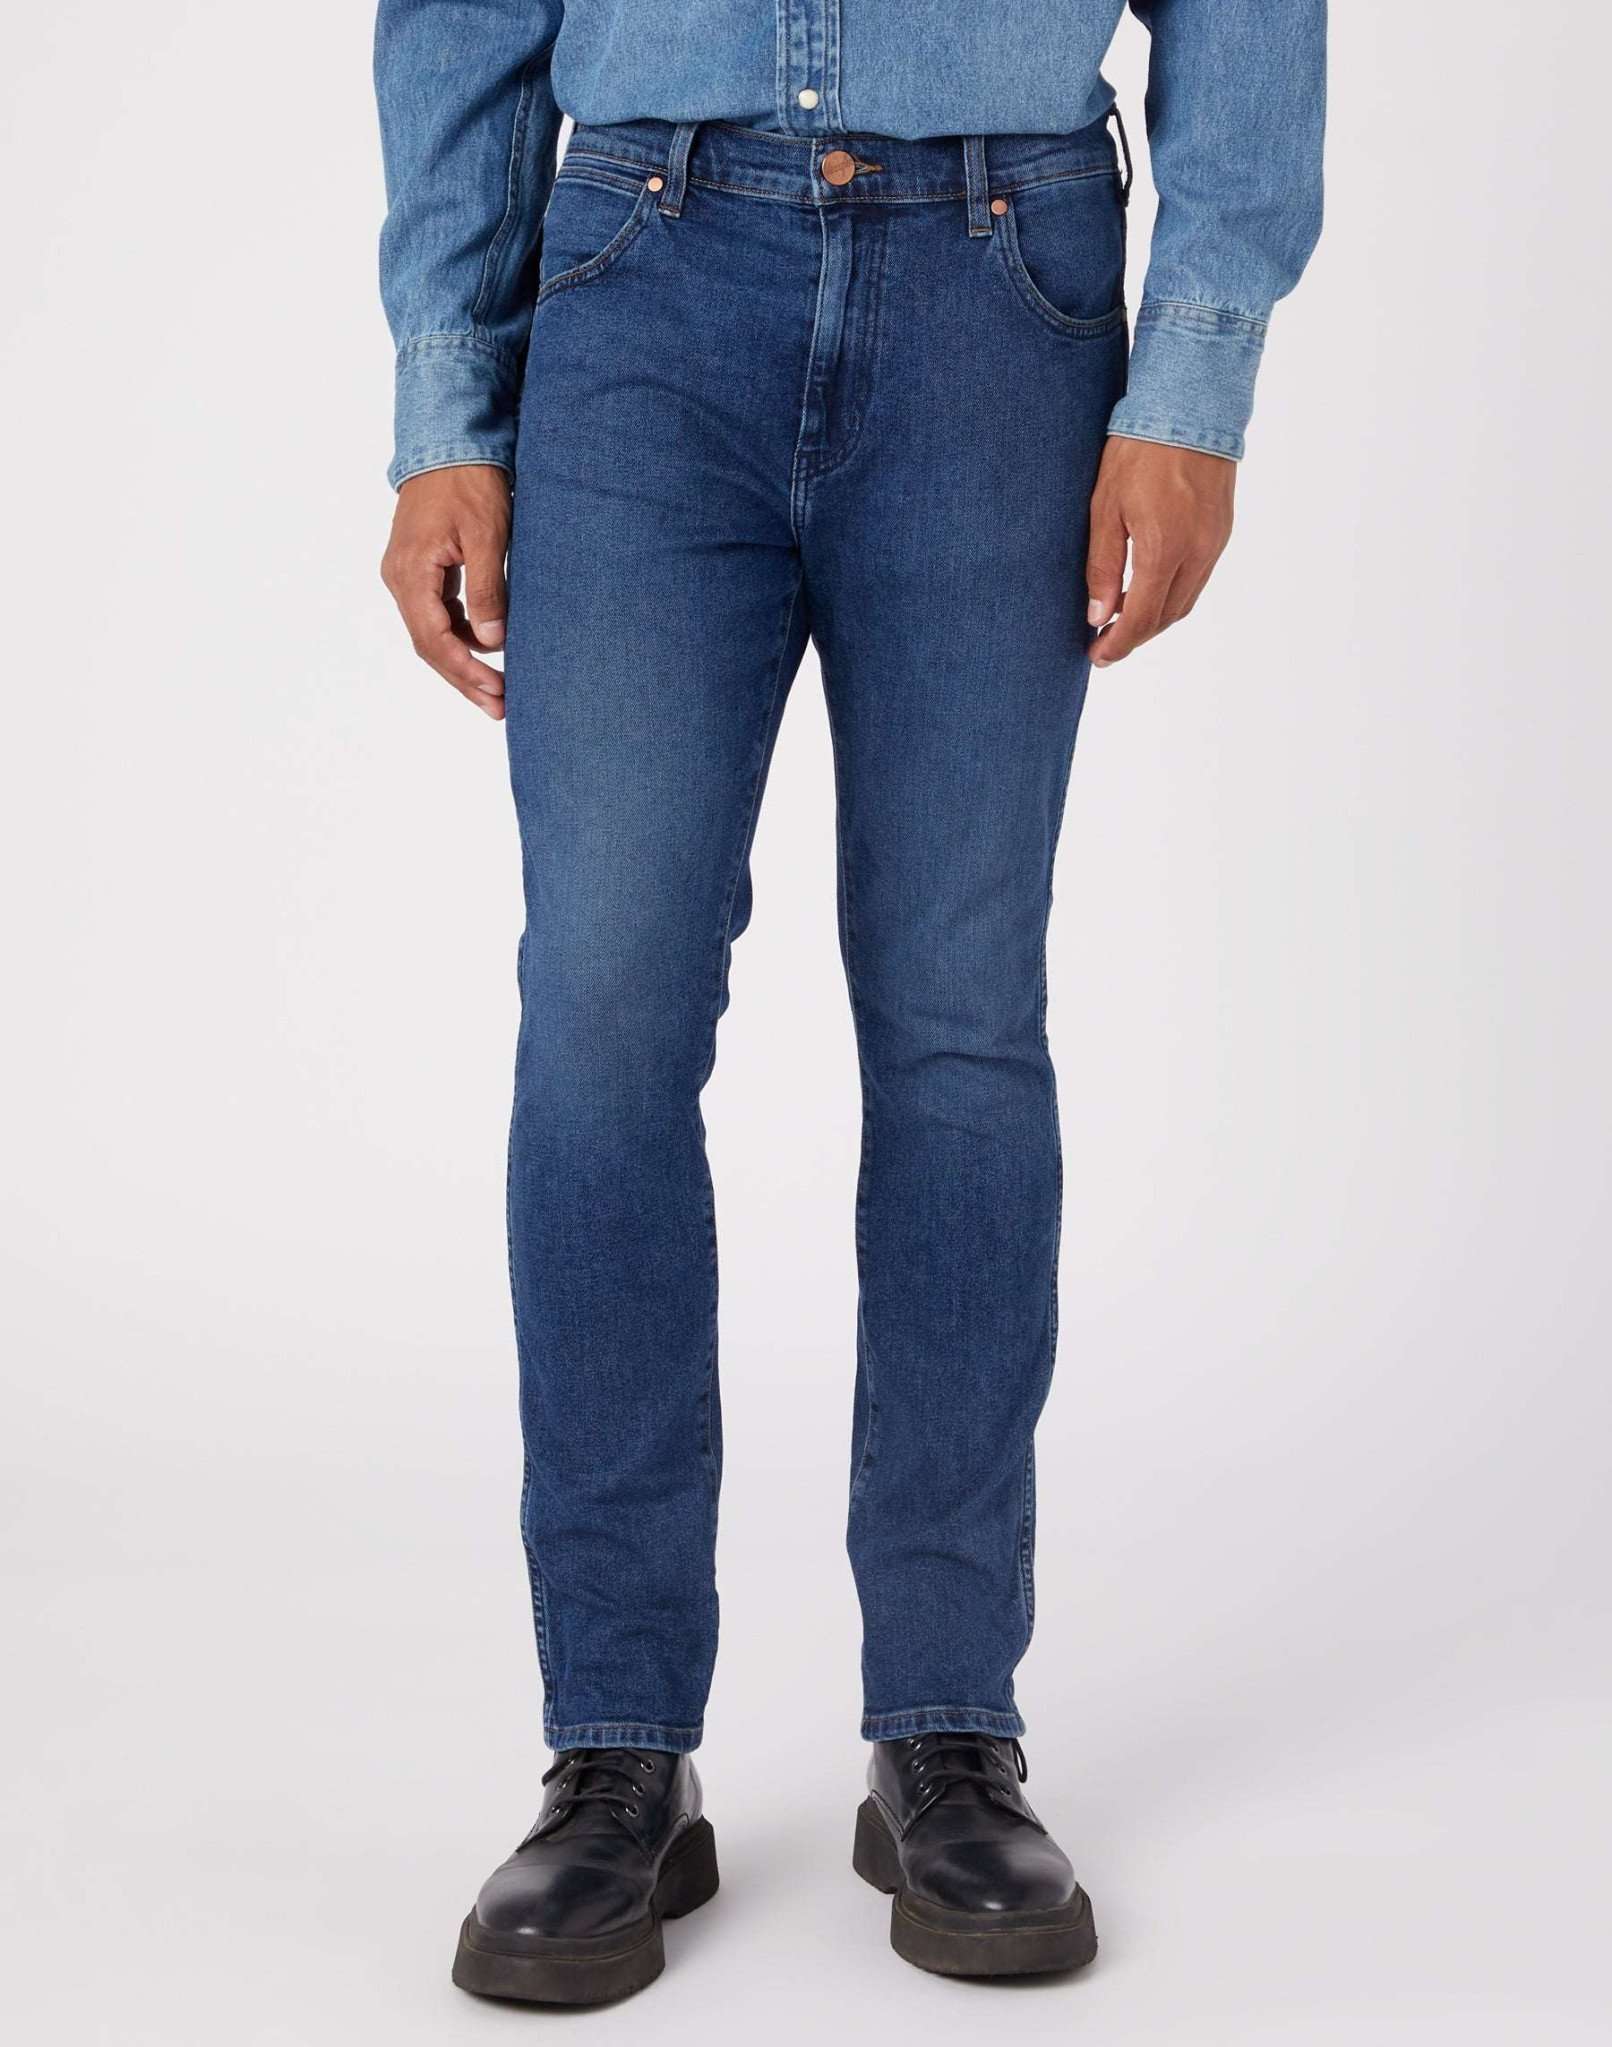 Larston Low Stretch in The Rock Jeans Wrangler   